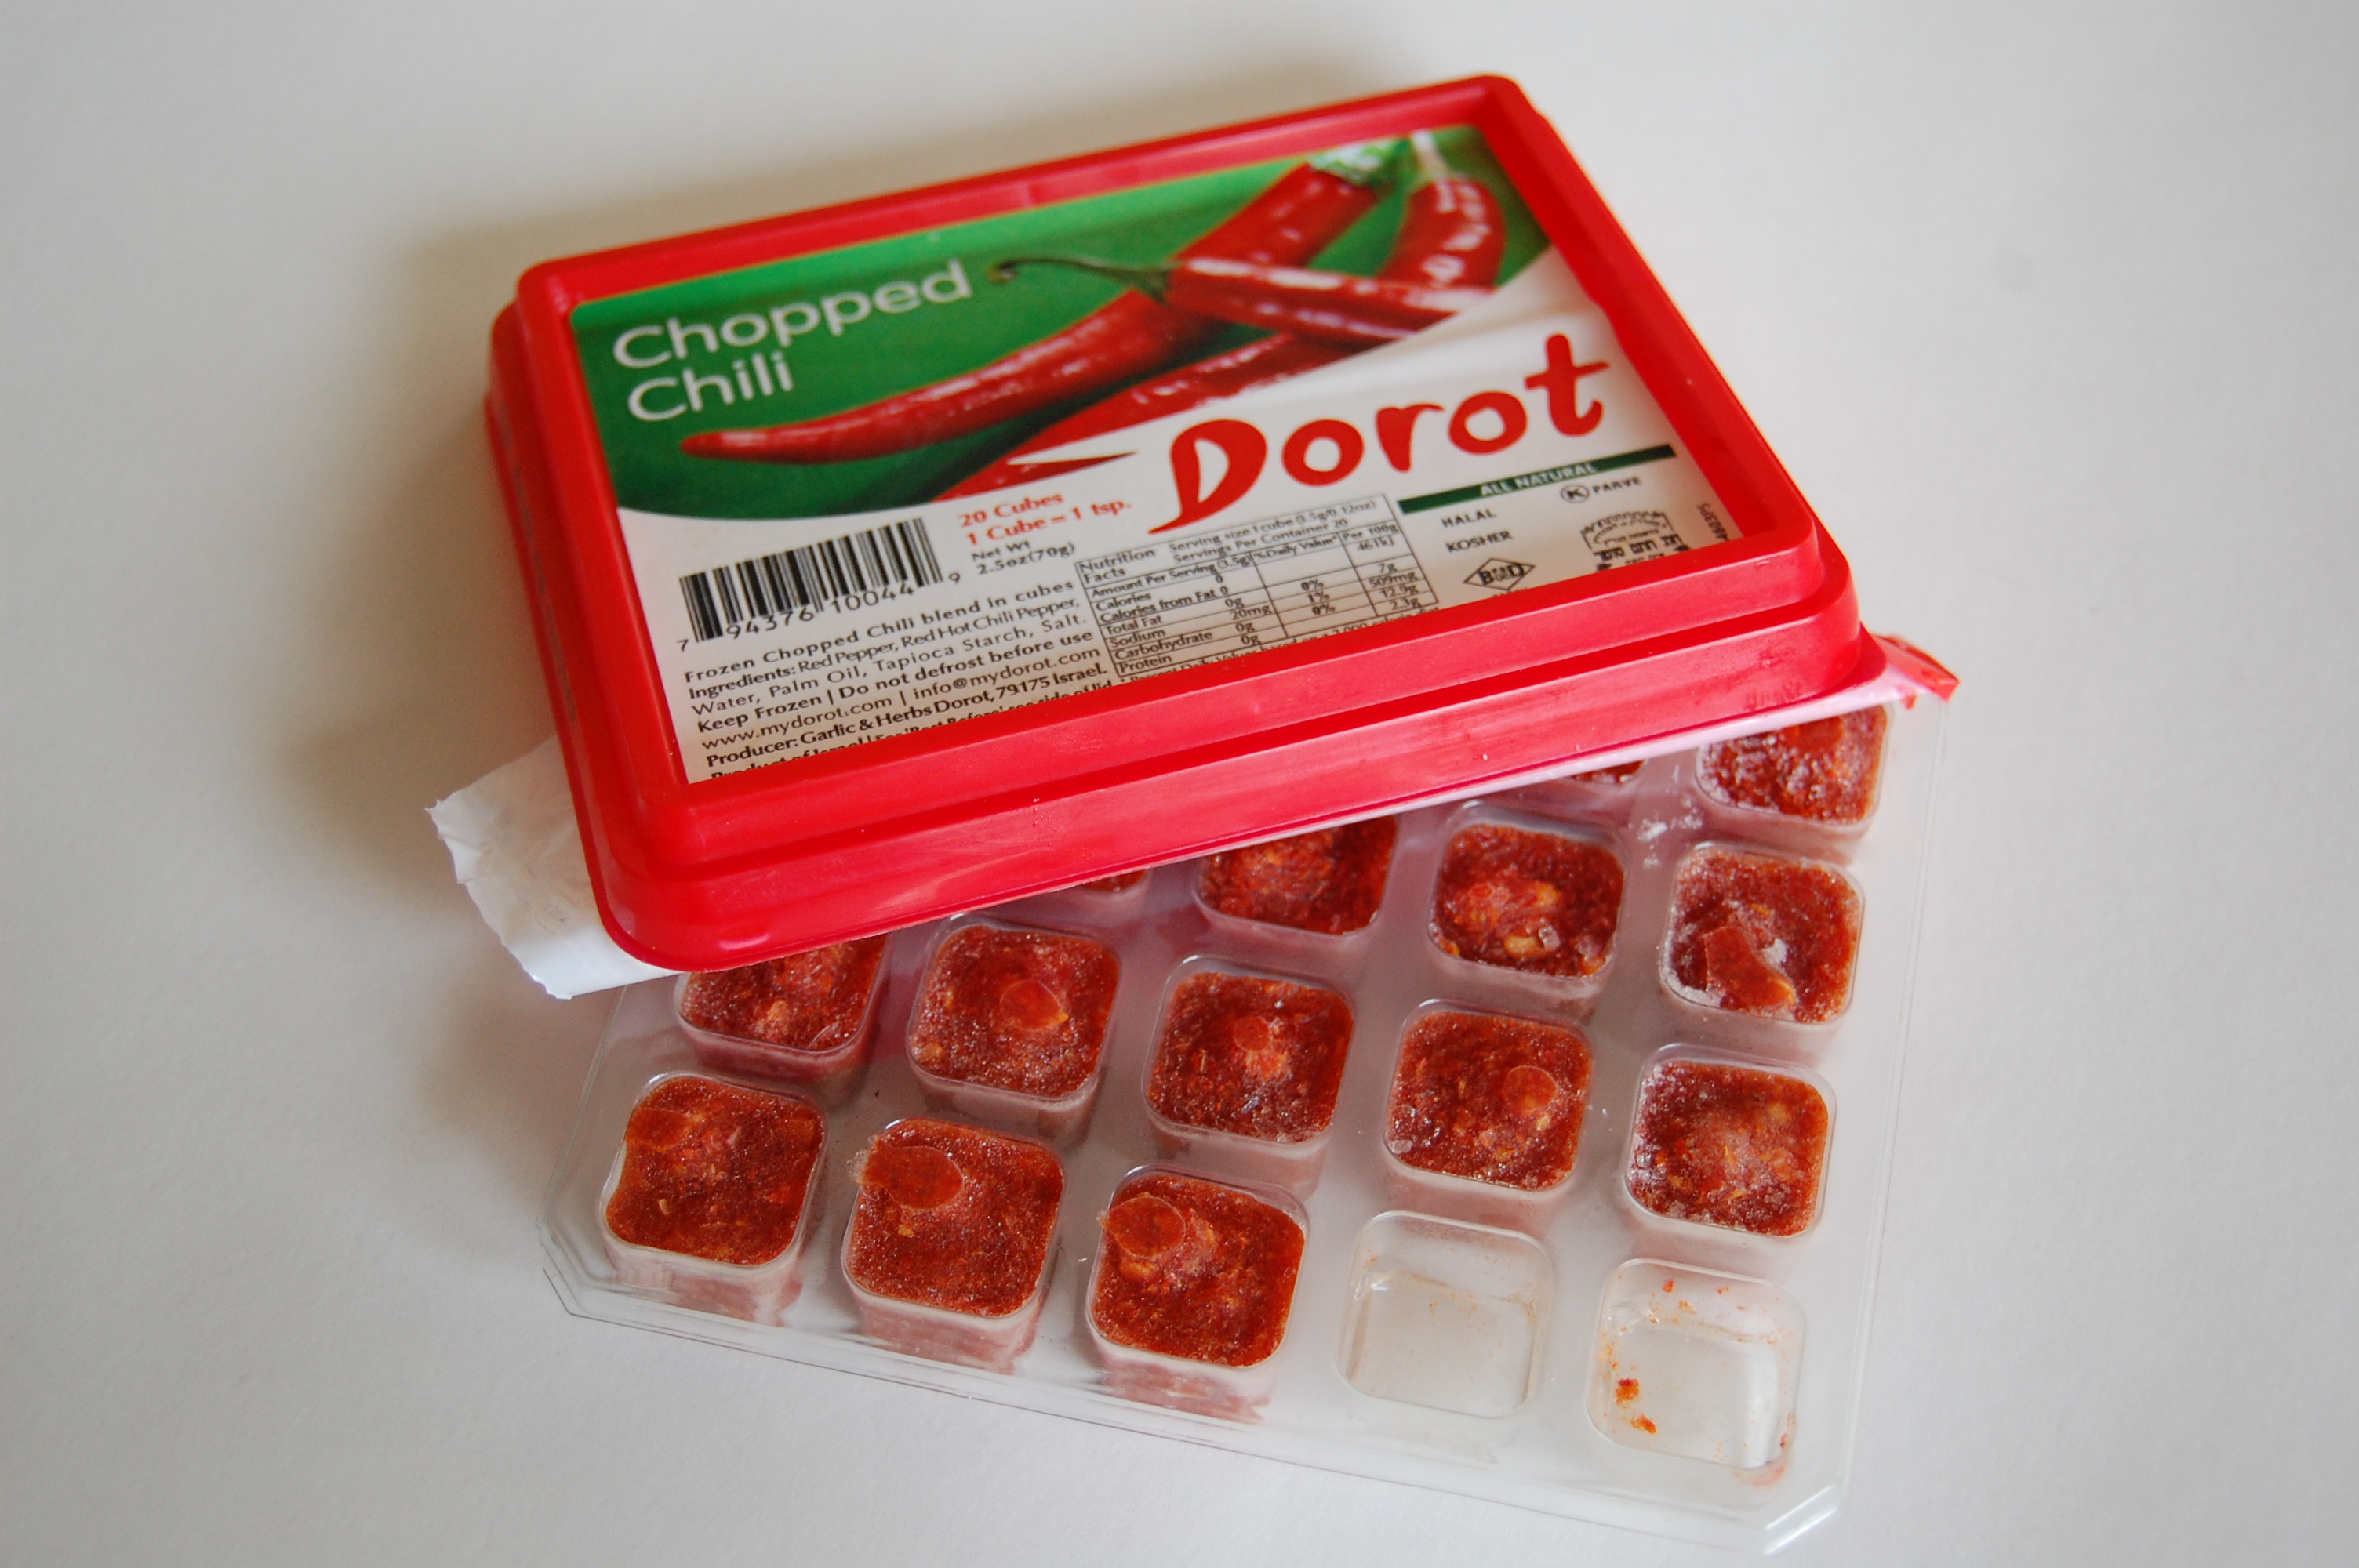 Product Review of Dorot's Crushed Garlic – Around Saturn